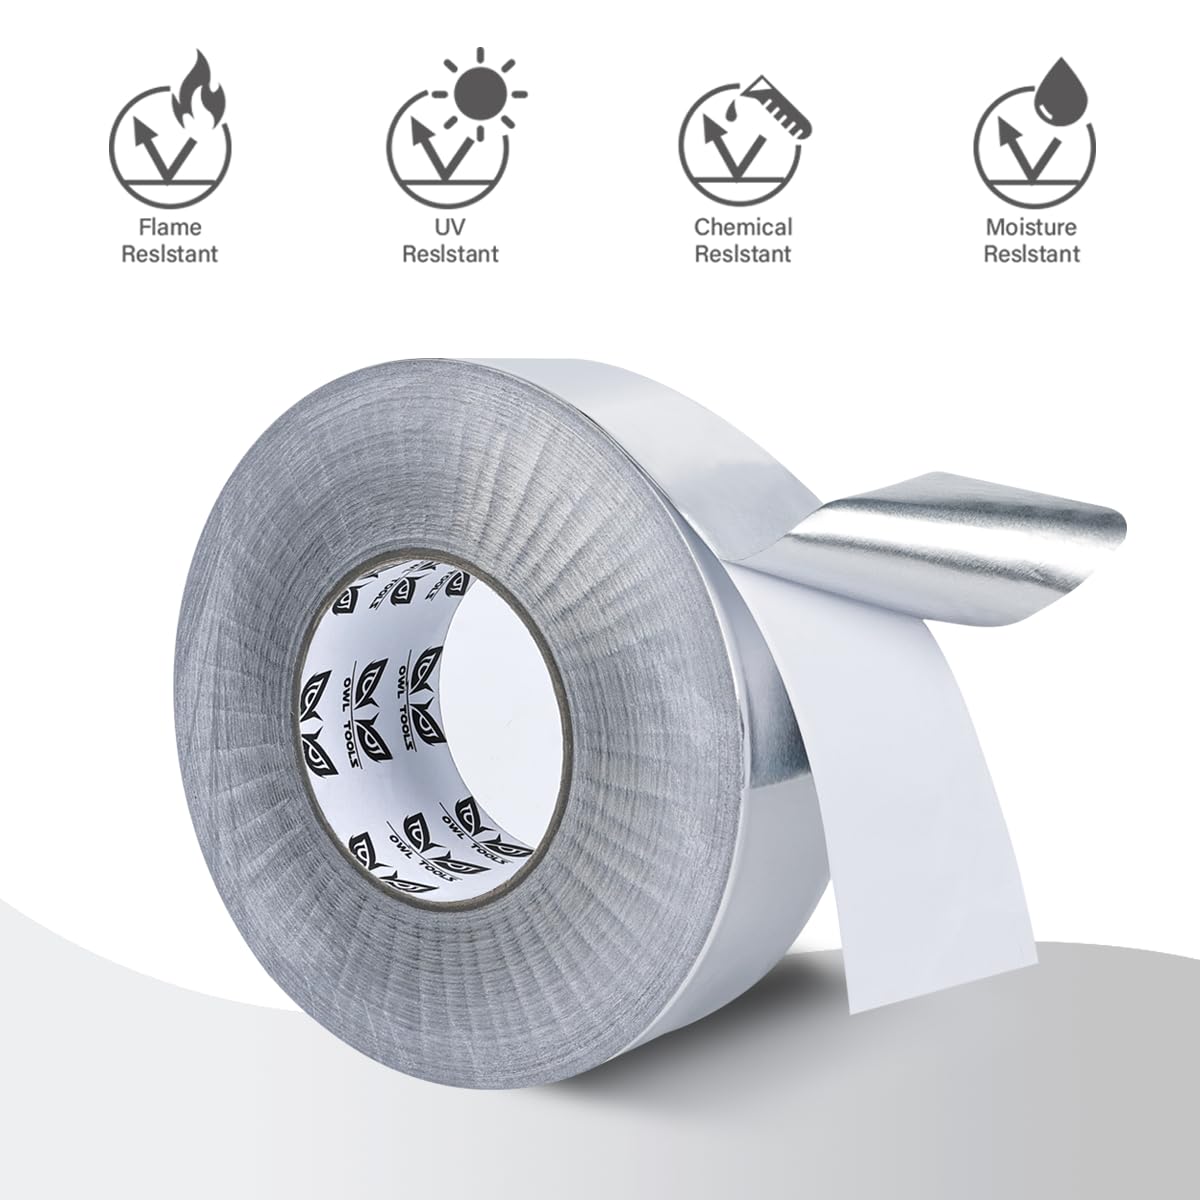 Owl Tools Aluminum Foil HVAC Tape (2" x 300' - 5X Longer Than The Competition) 3.9 mil - Perfect for Ductwork, Insulation, Dryer Vents, AC, & More!